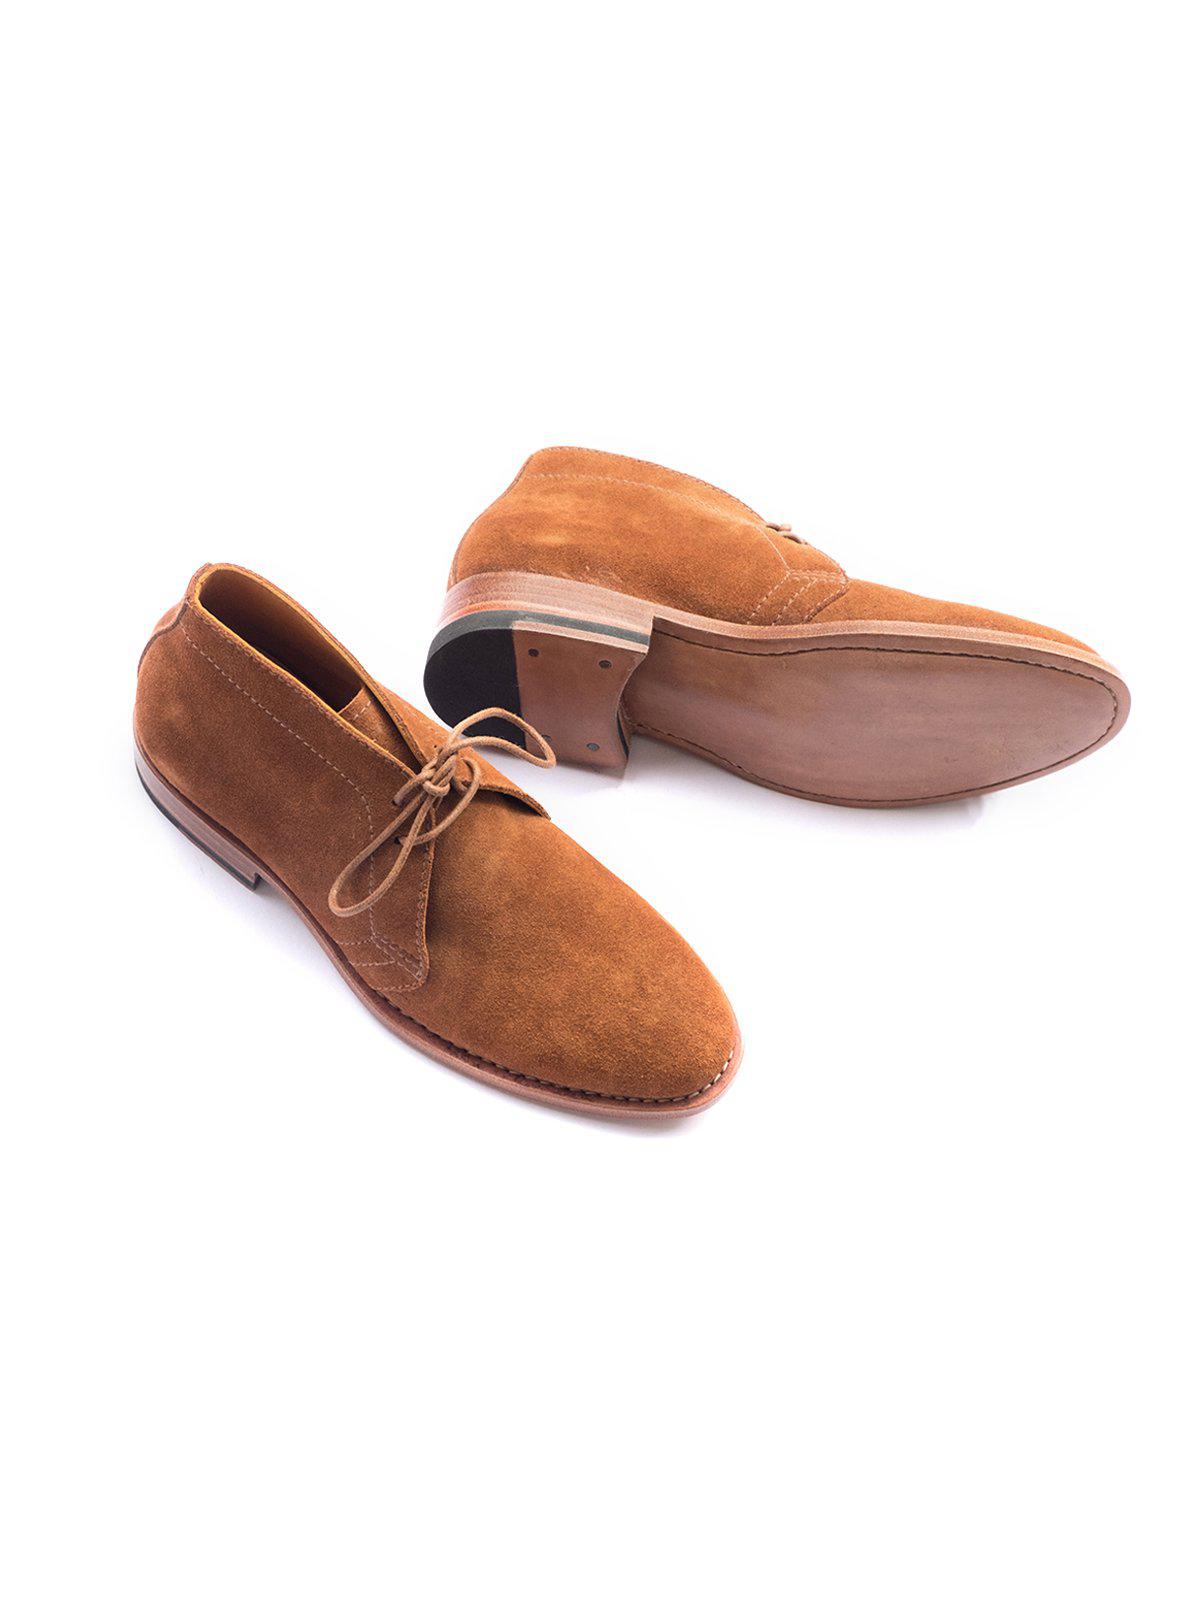 Santalum Casual Rover Chukka Brown Suede Leather - MORE by Morello Indonesia